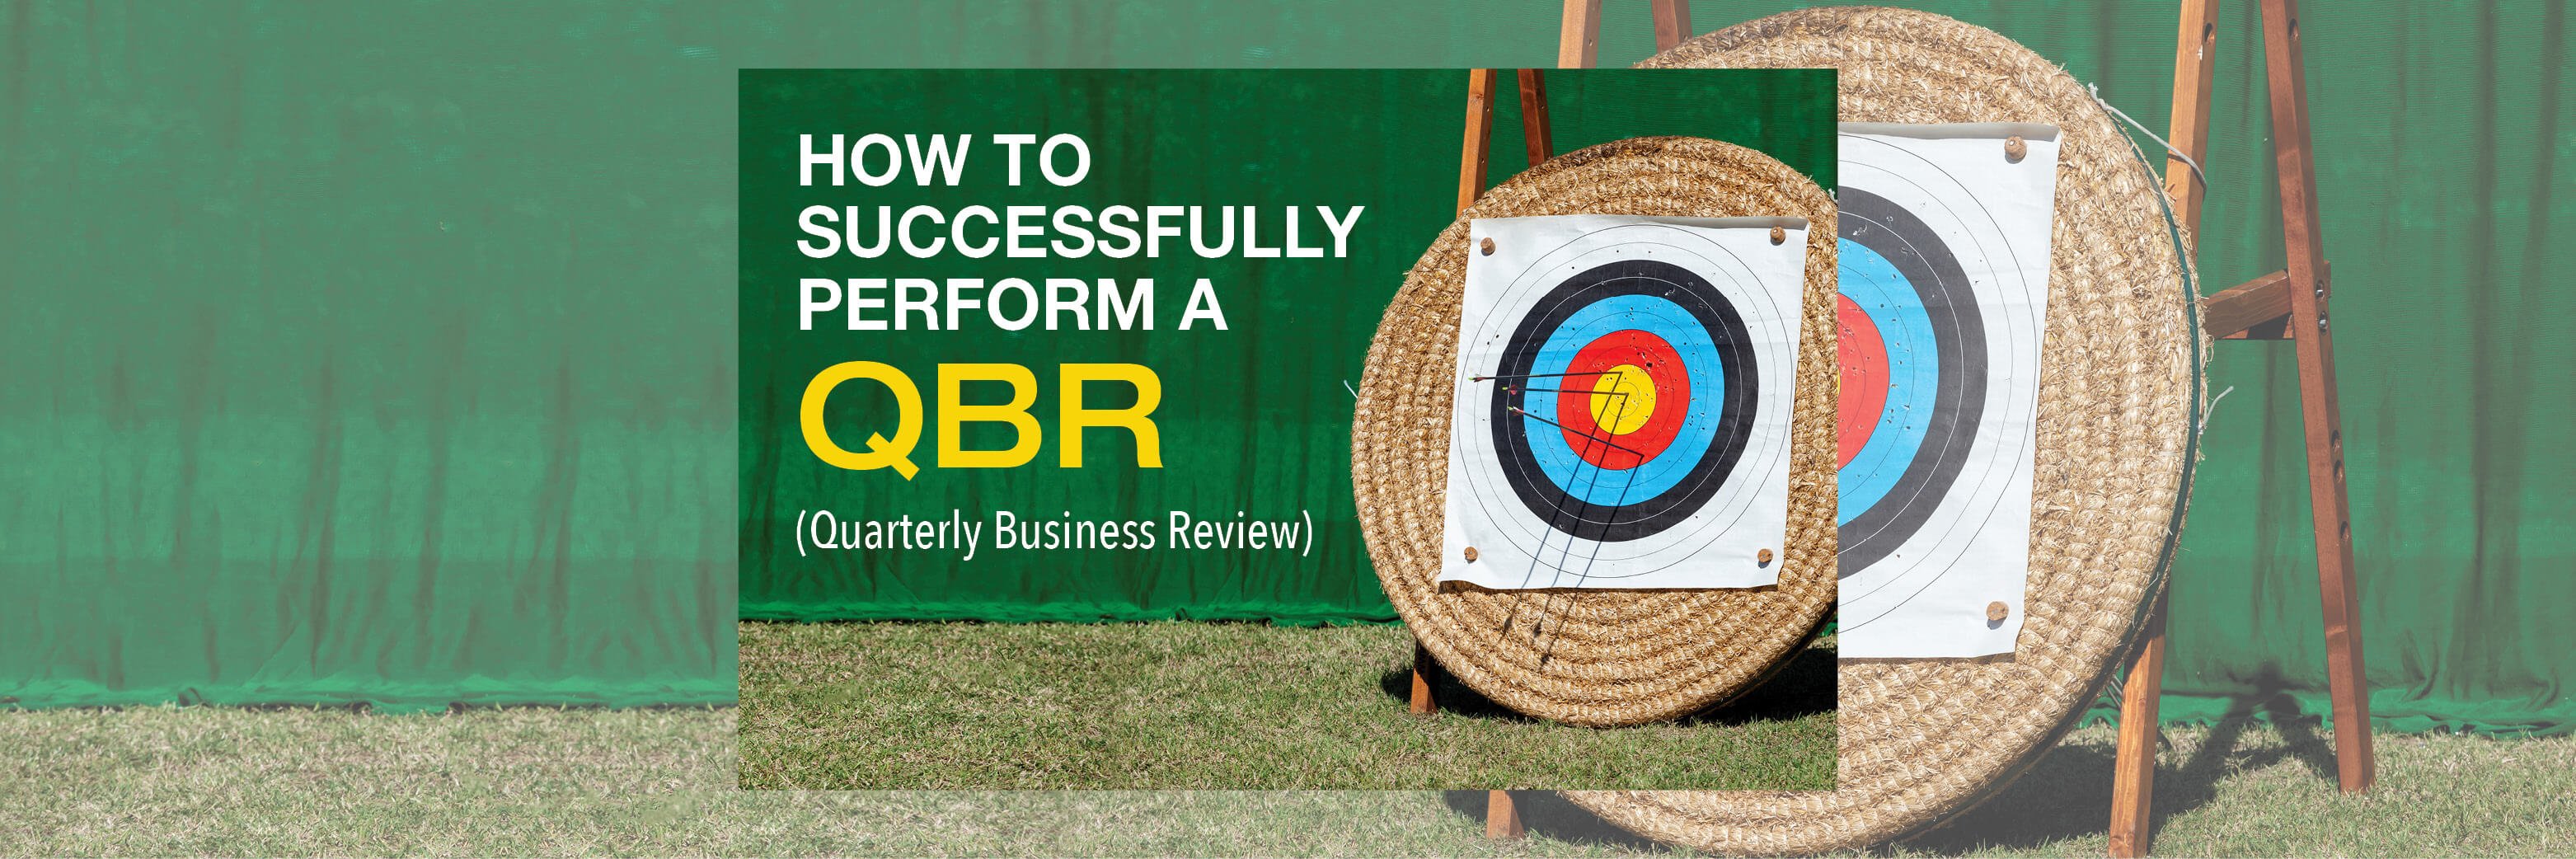 Four Steps to Successfully Perform a QBR (Quarterly Business Review)